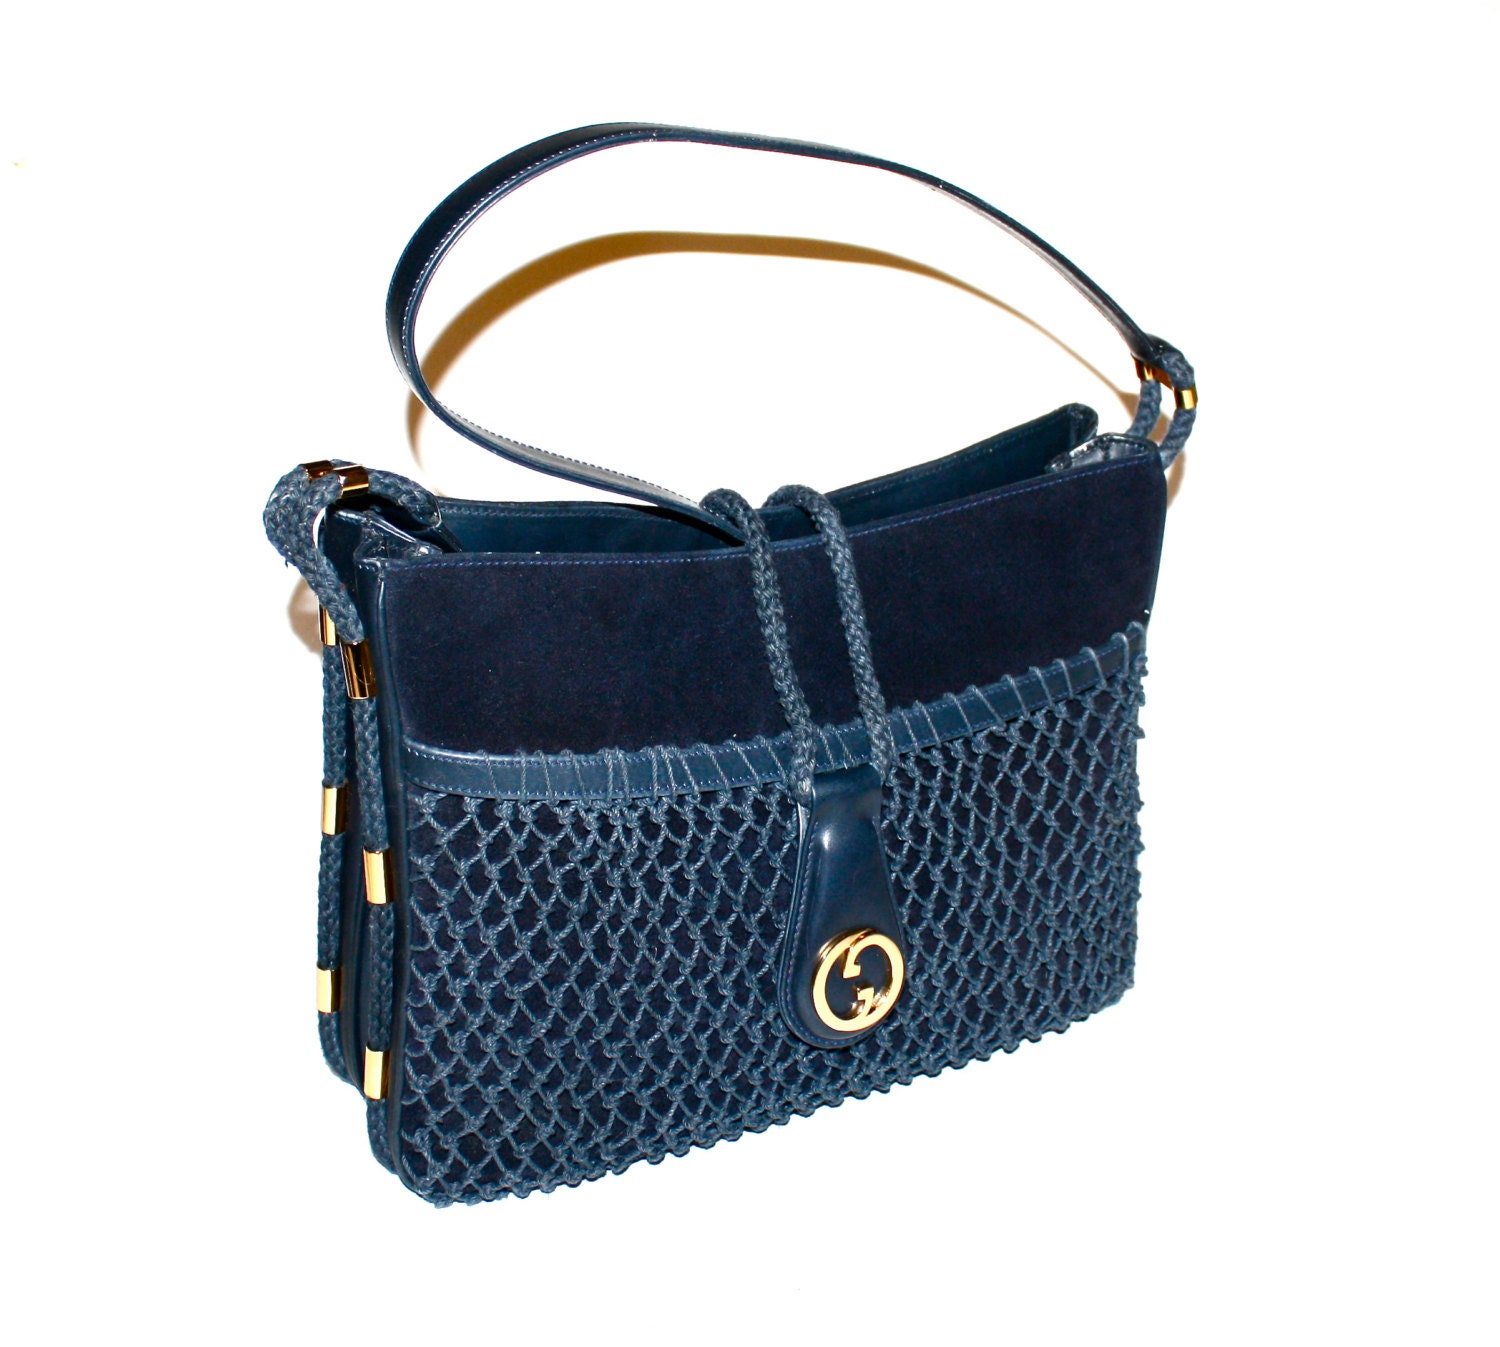 GUCCI Vintage Handbag Navy Suede Leather Rope by StatedStyle